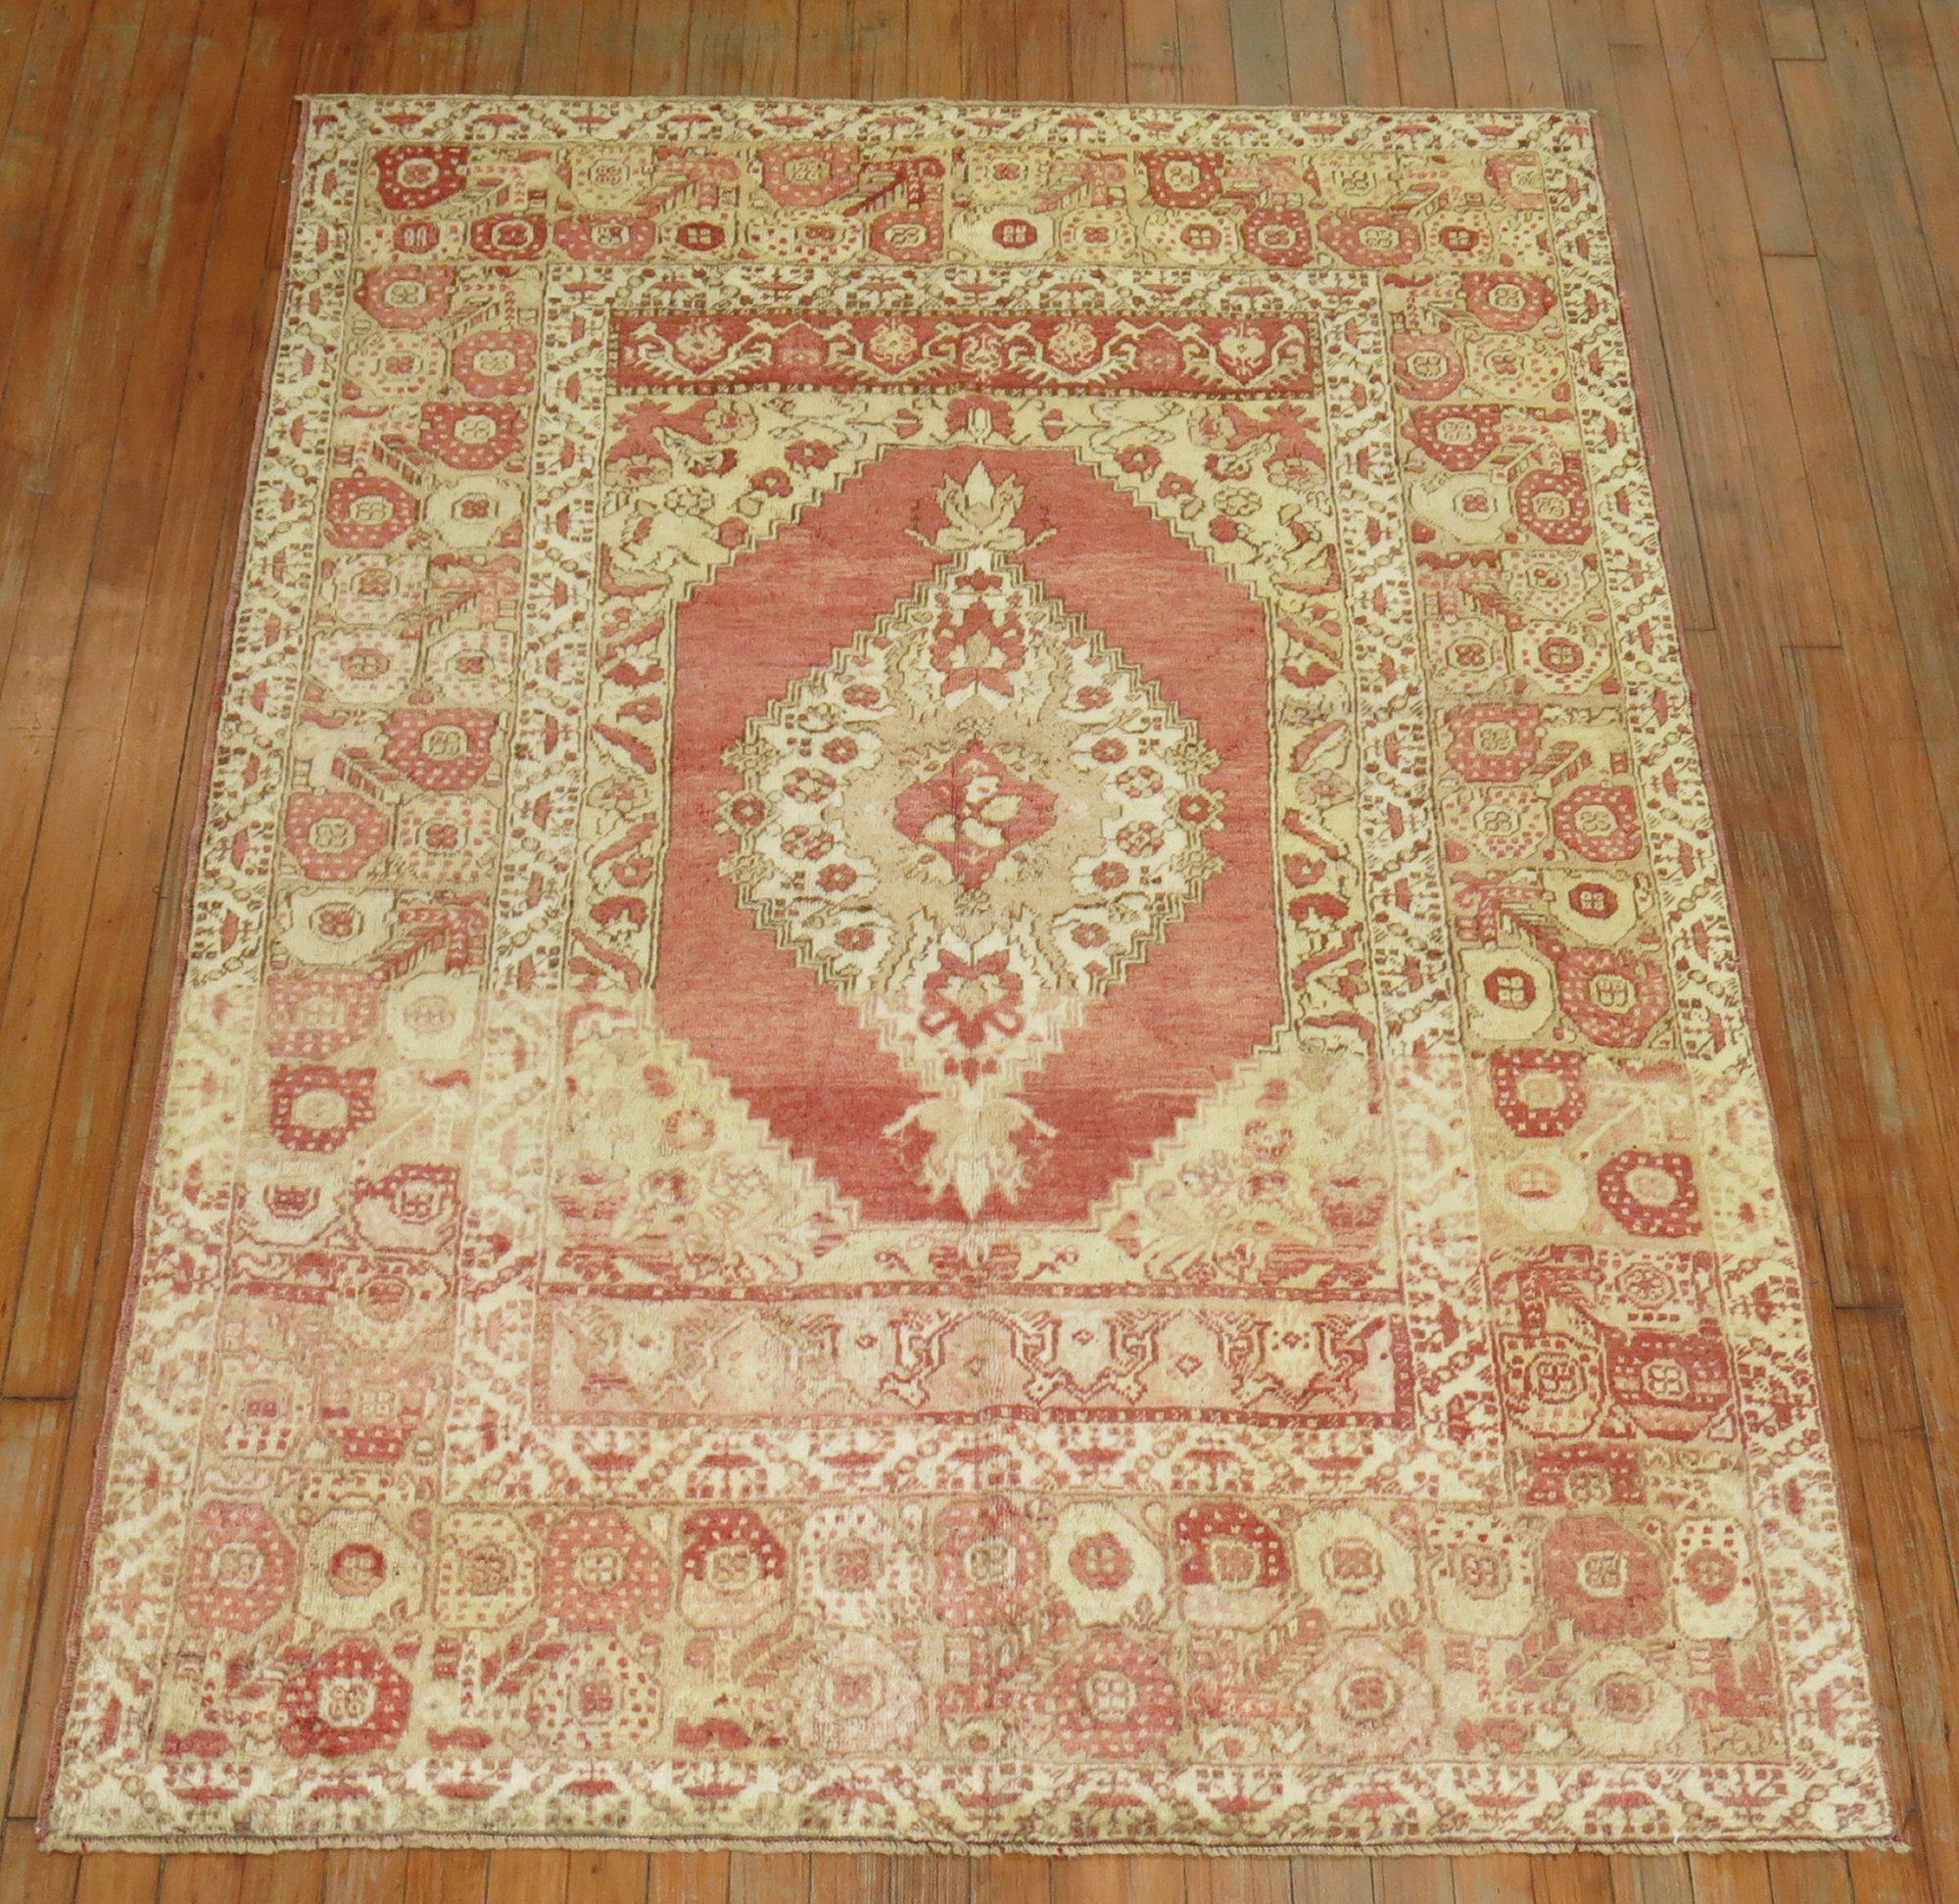 Turkish Oushak rug with a traditional medallion border design in melon red, brown and ivory accents, circa 1920.

Measures: 4'5